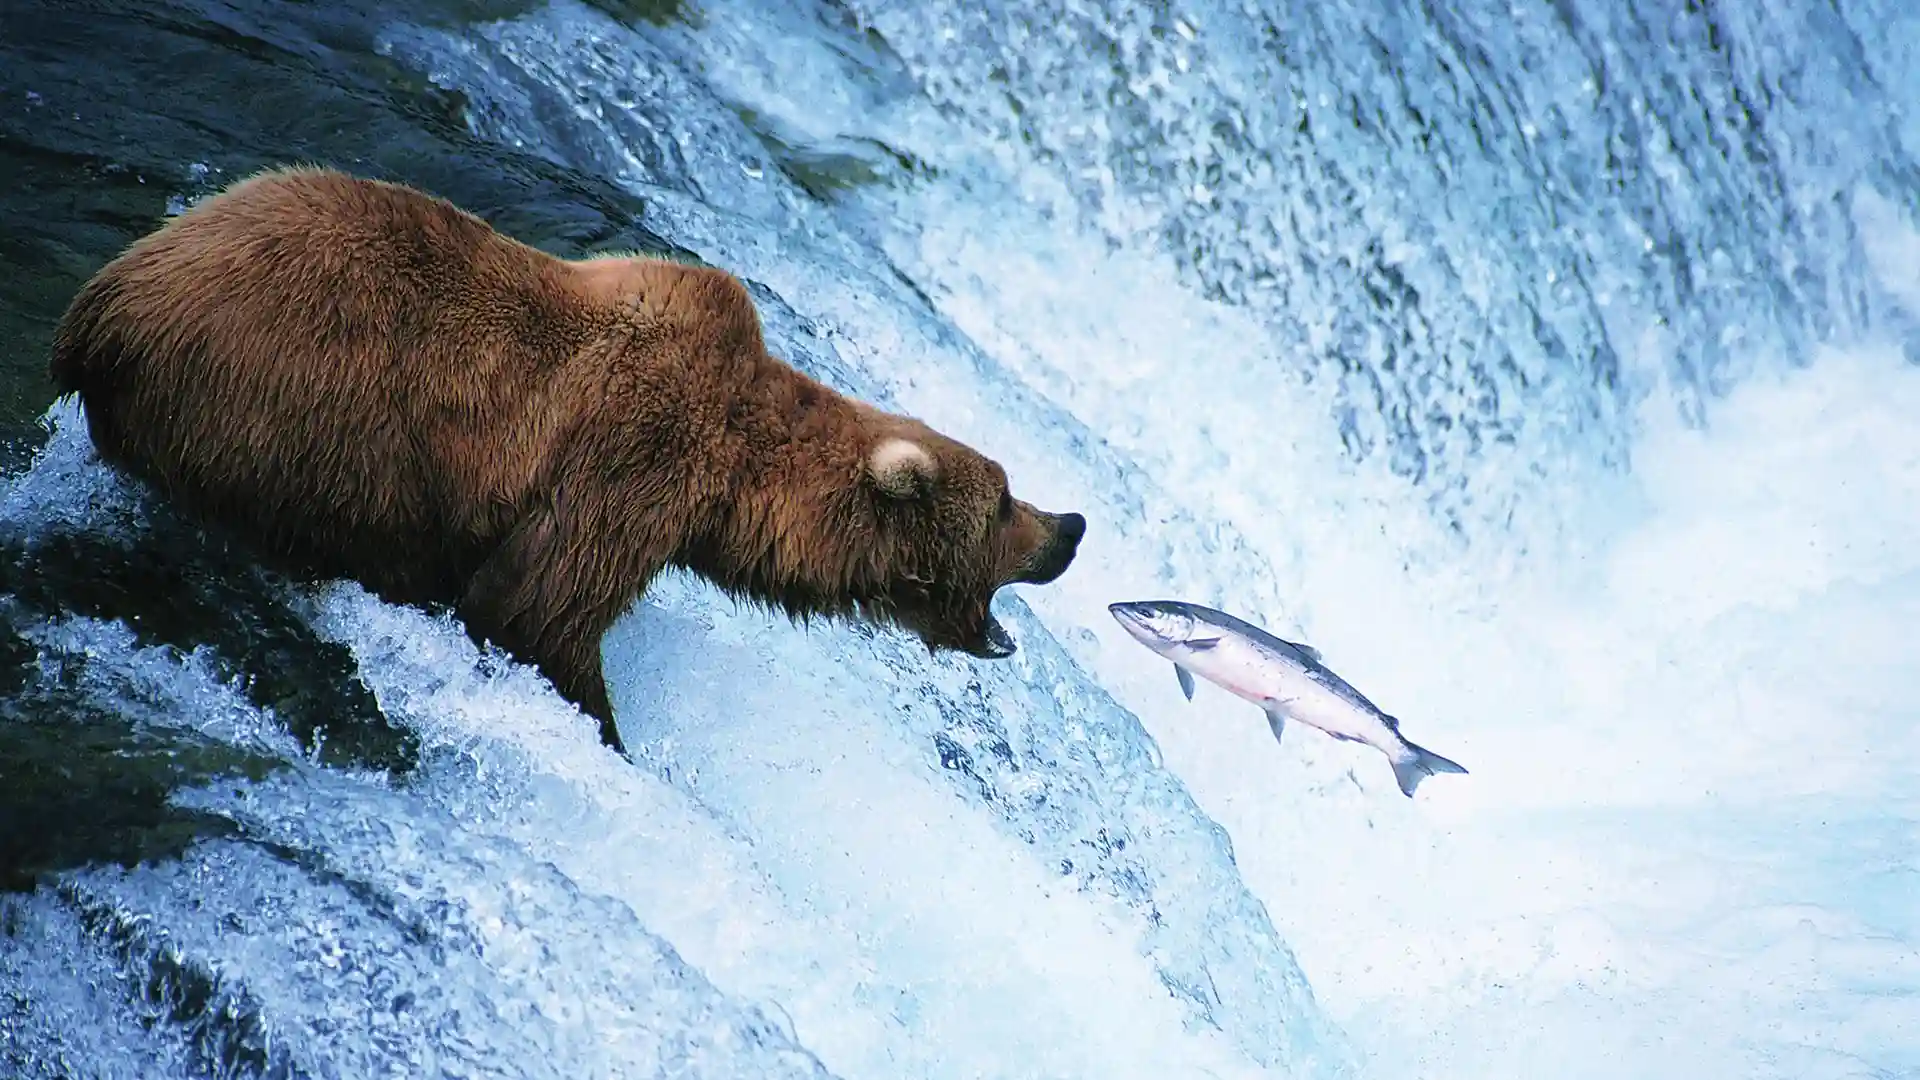 View of bear trying to catch salmon out of water.